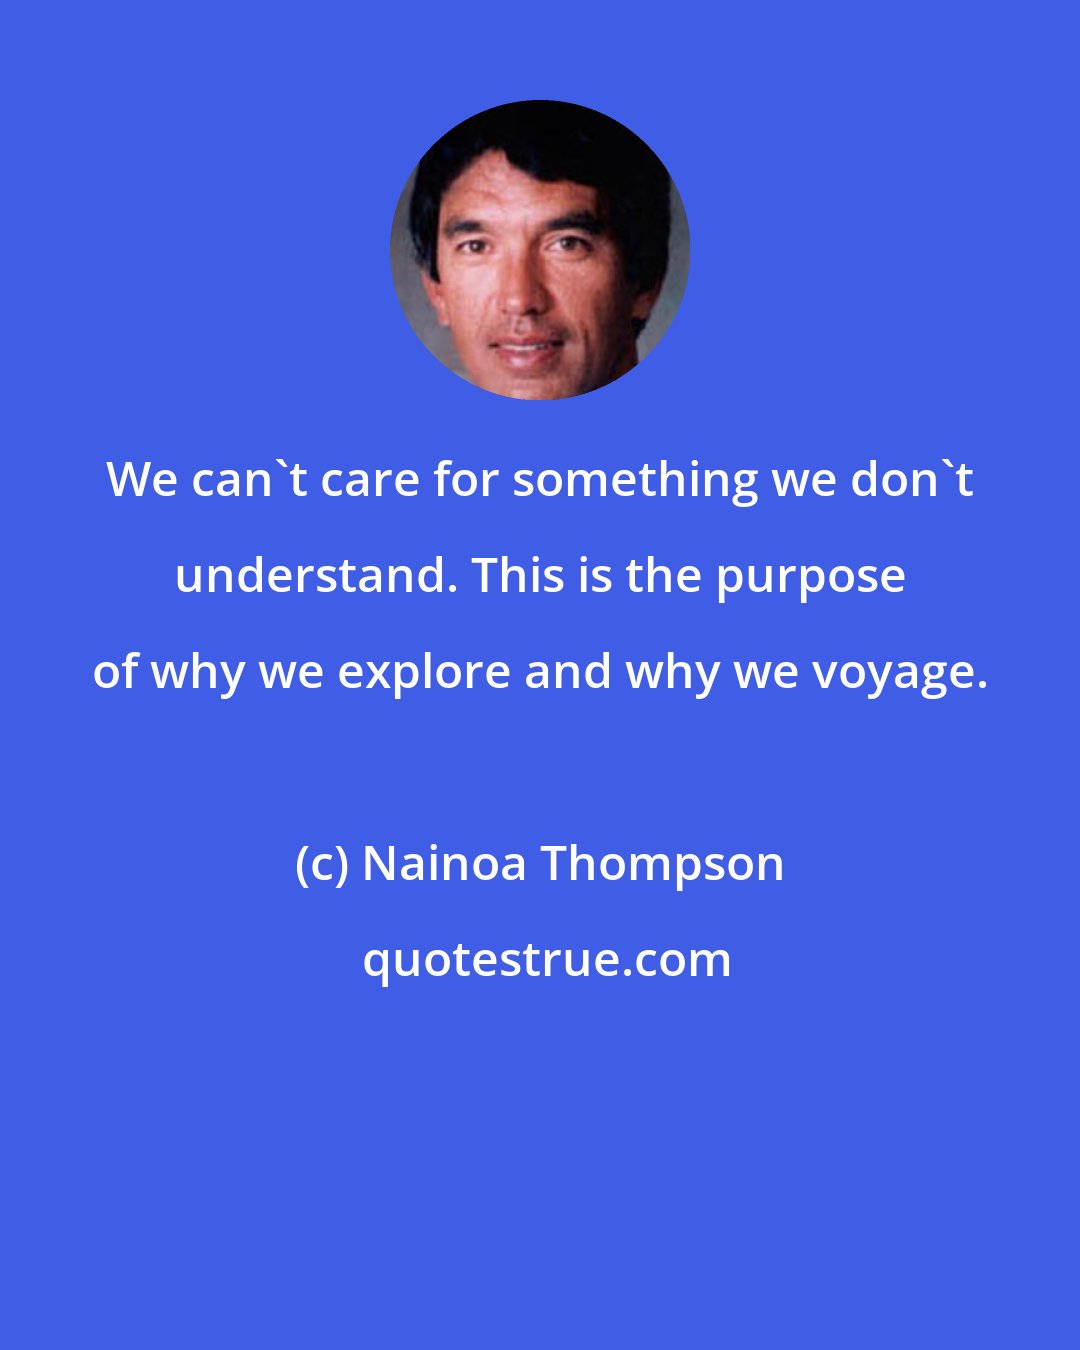 Nainoa Thompson: We can't care for something we don't understand. This is the purpose of why we explore and why we voyage.